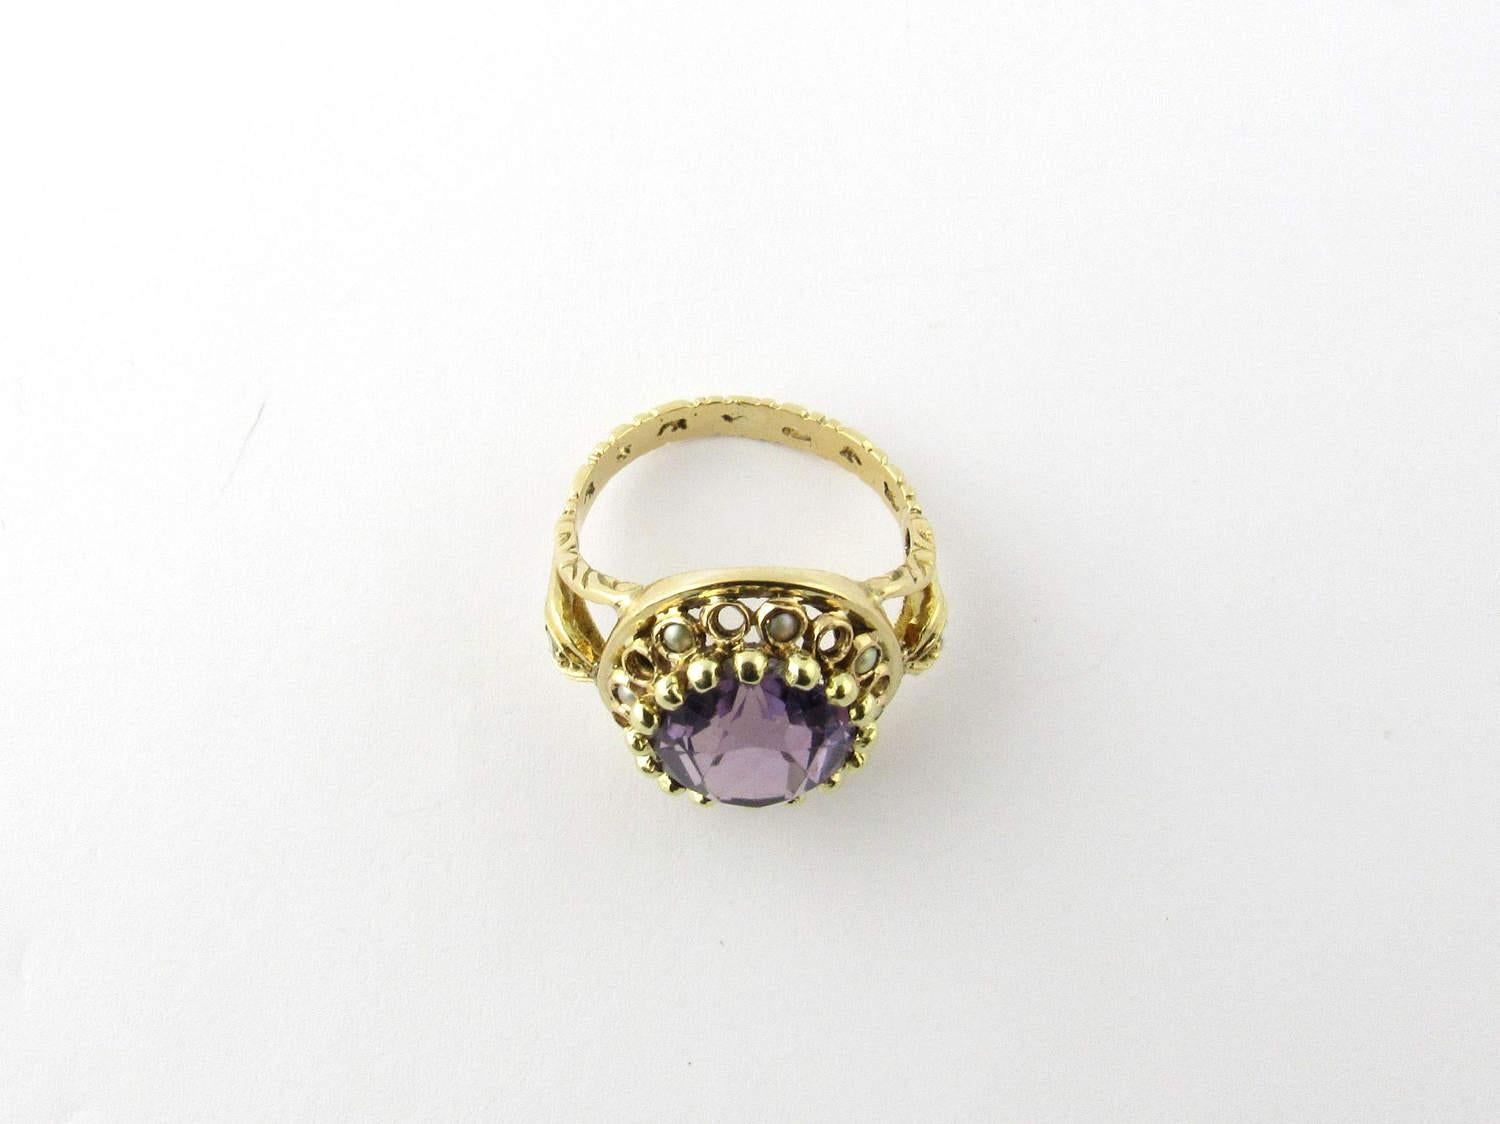 Vintage 14 Karat Yellow Gold Amethyst and Pearl Ring Size 5.75- 

This beautiful ring features a genuine amethyst (13 mm x 10 mm) surrounded by seed pearls and set in beautifully detailed yellow gold. Accented with a clear stone on each side of